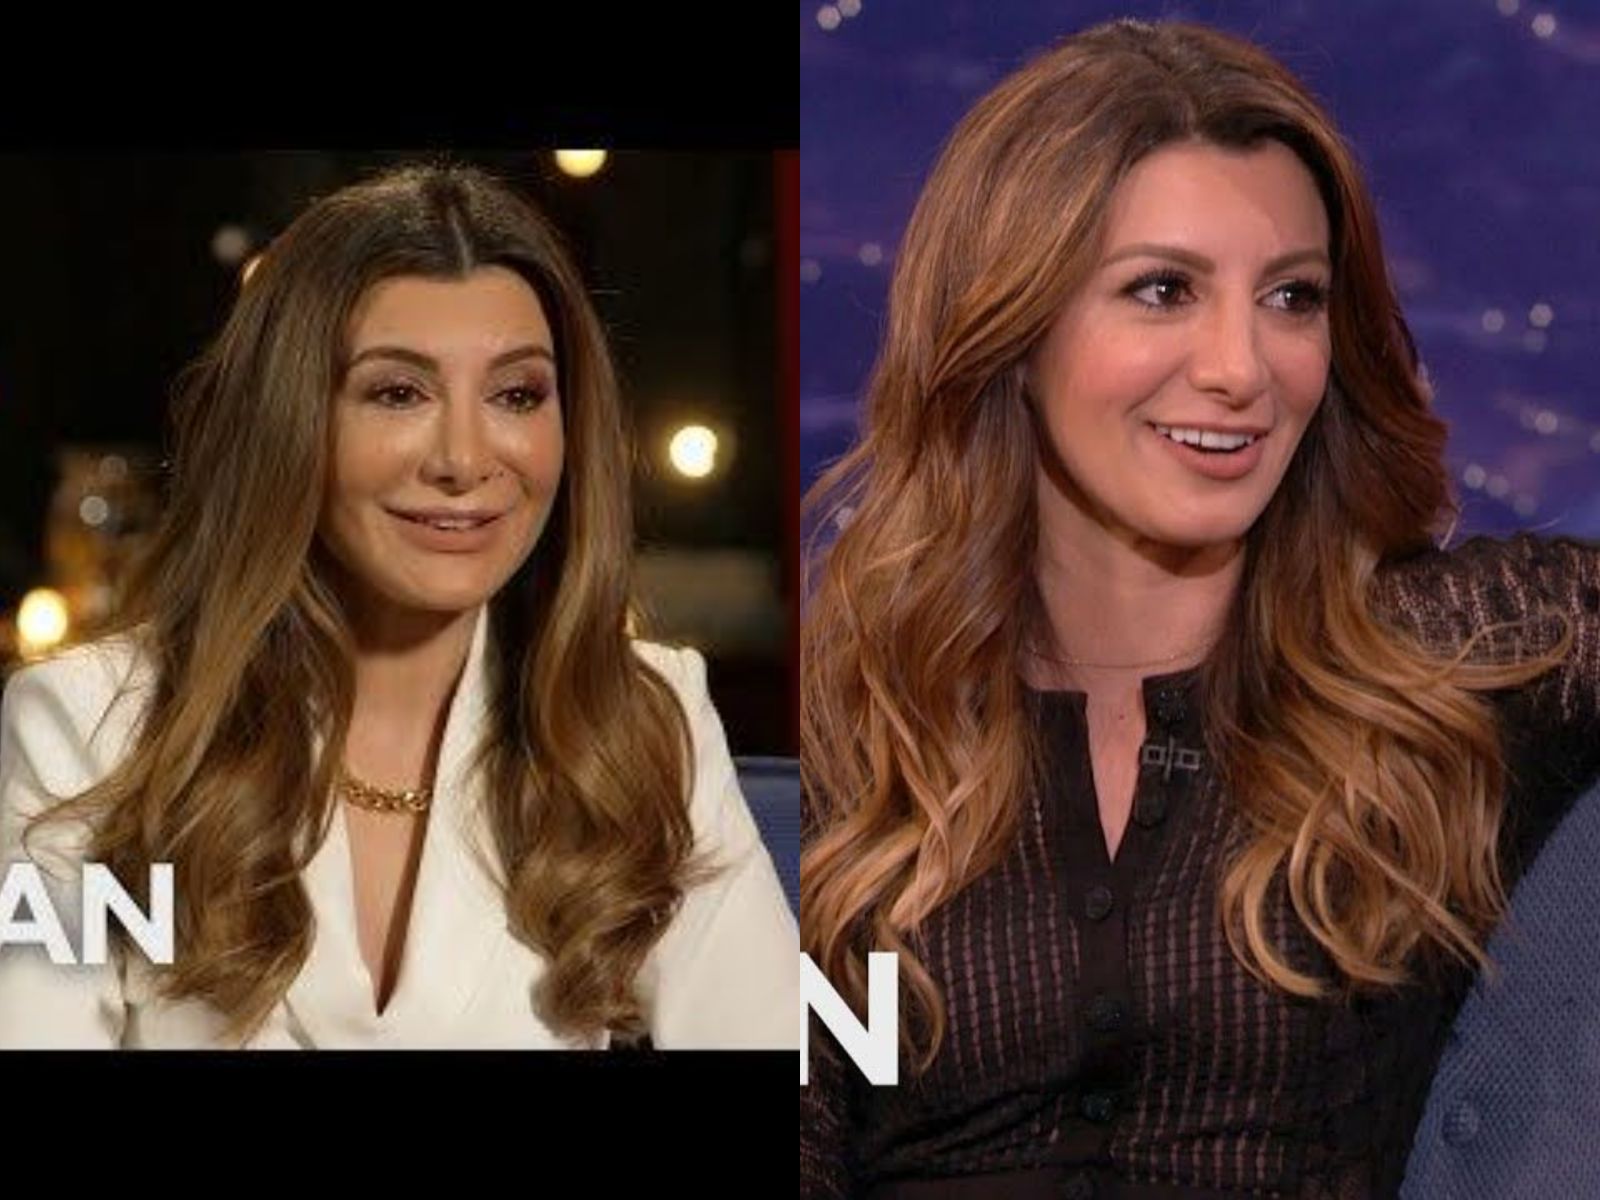 Nasim Pedrad's Appearance on Conan Show Sparking Plastic Surgery Speculation